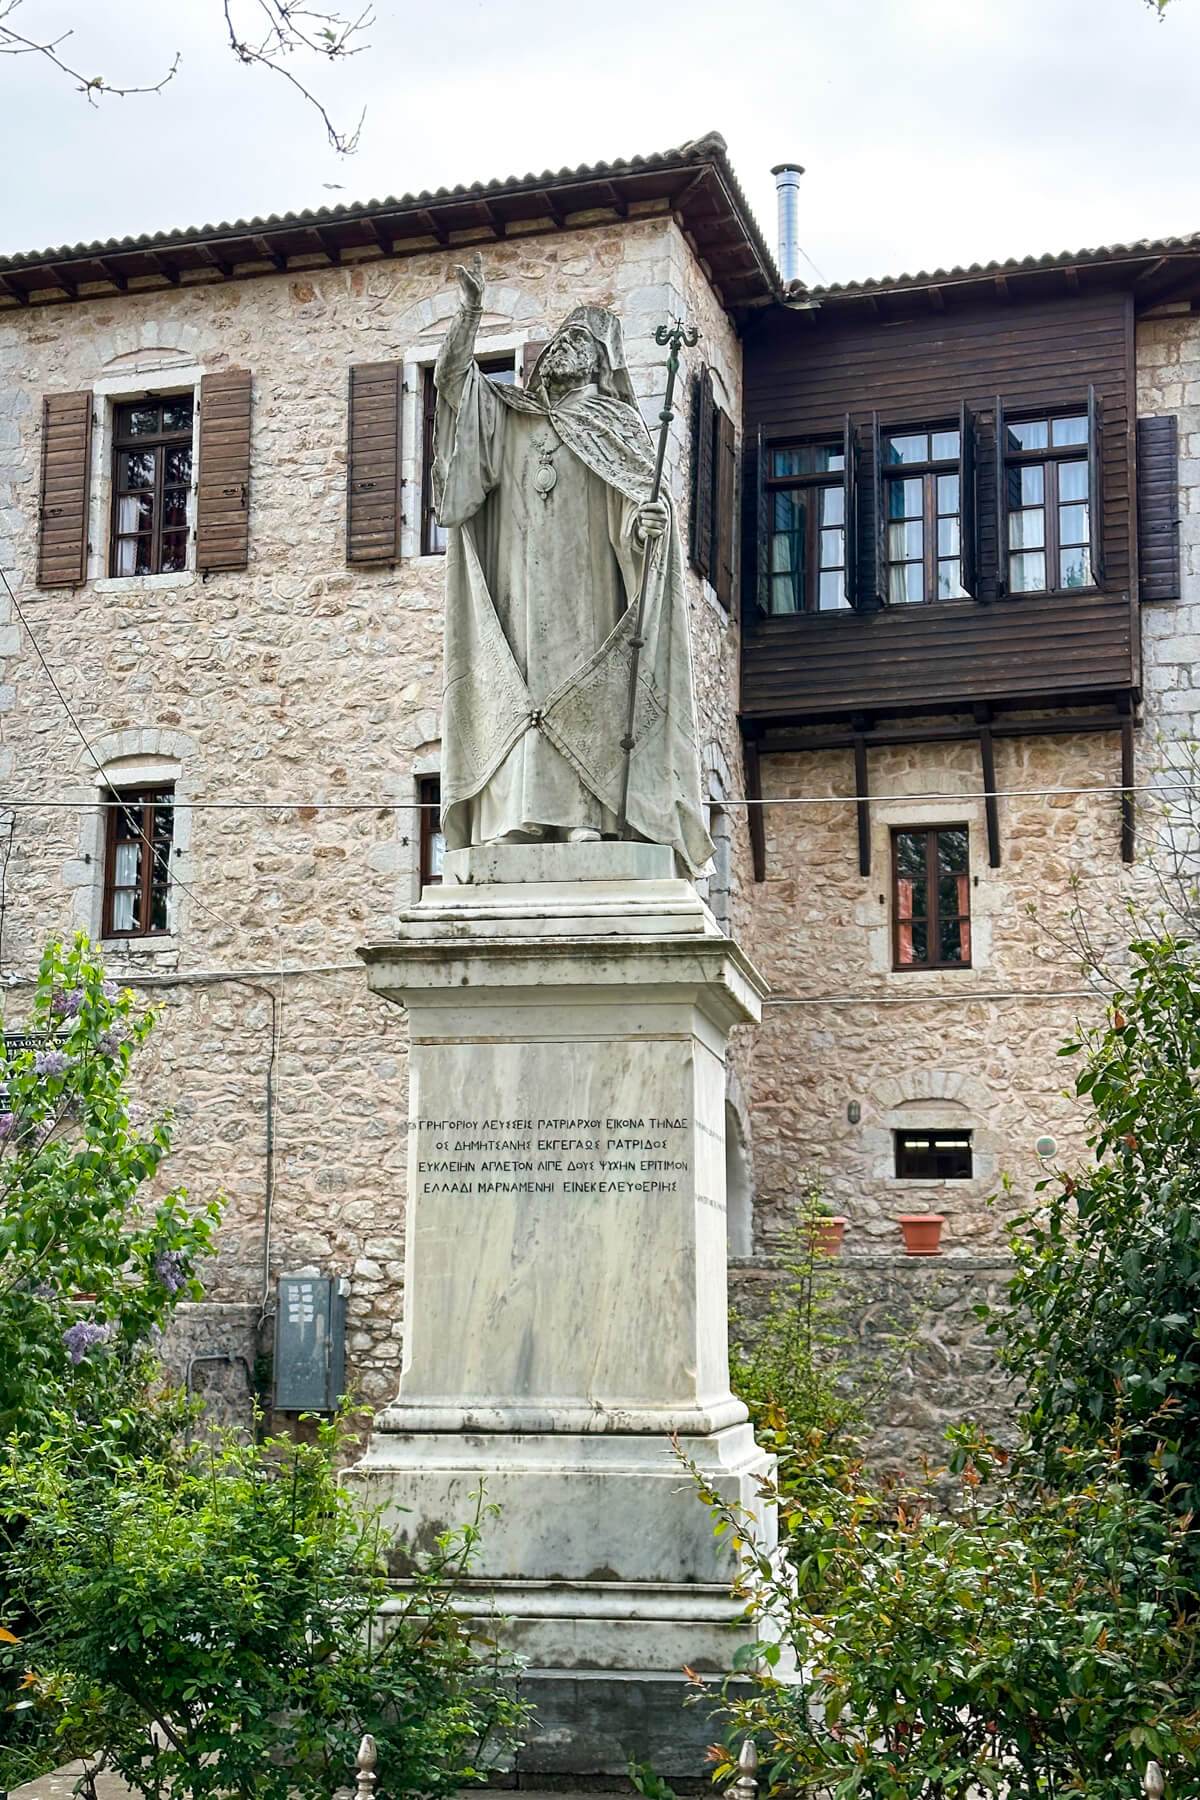 Statue of a bishop in Dimitsana in front of some brown buildings with shutters.